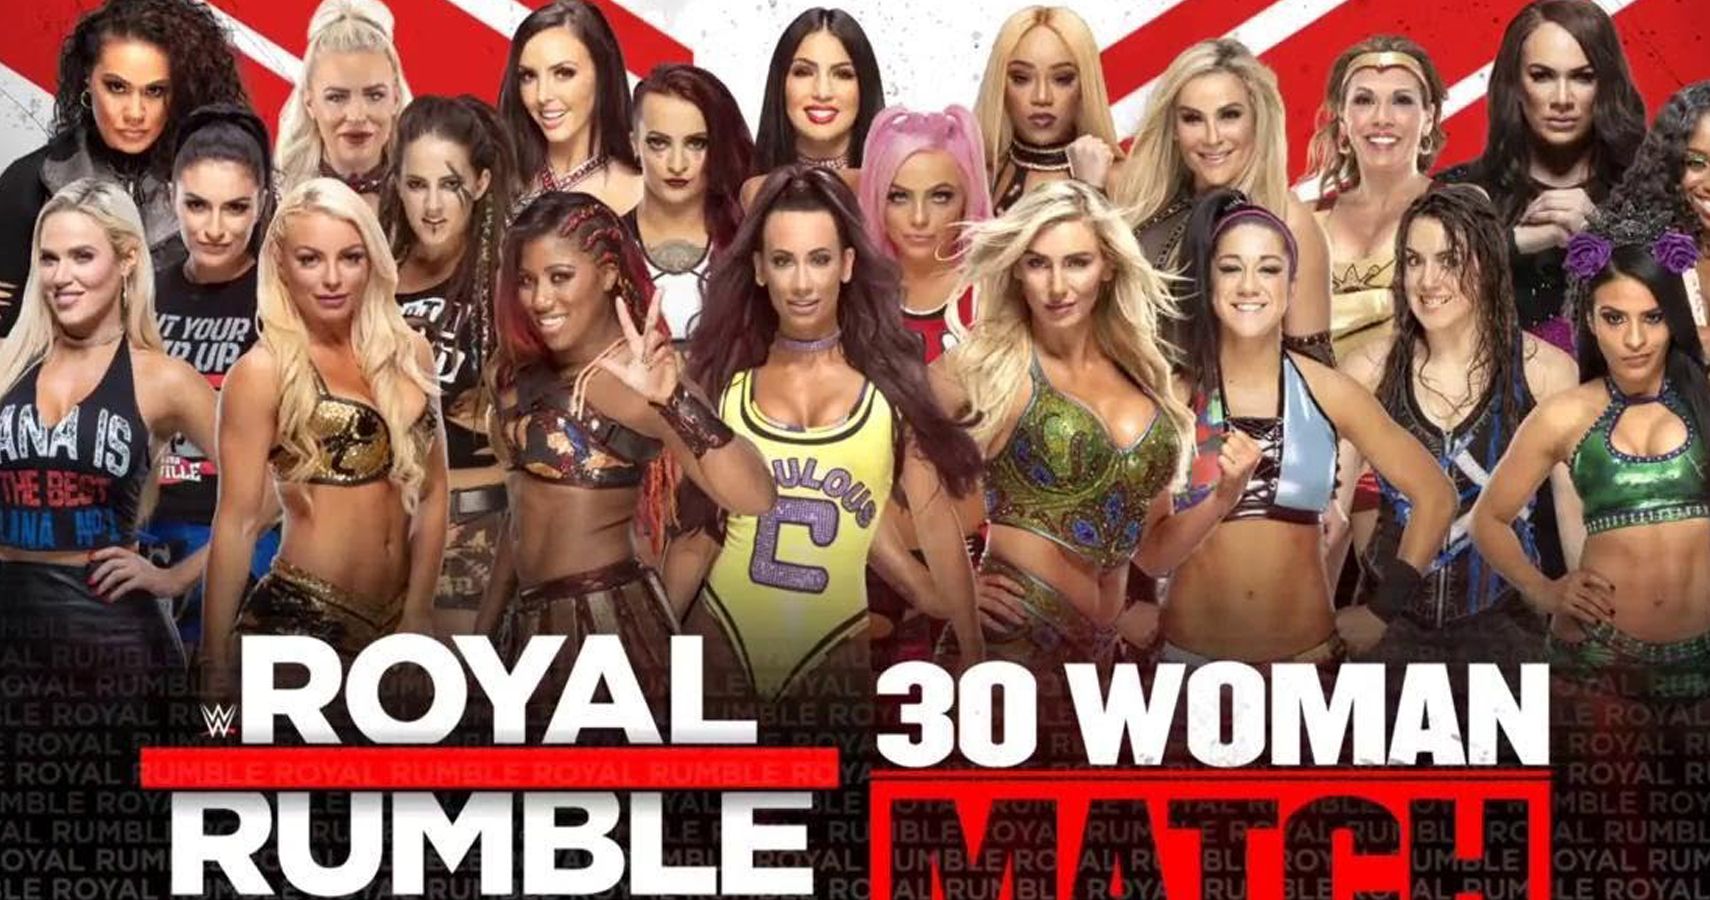 Potential Spoiler On A Female Entry Into The Womens Royal Rumble Match 9956